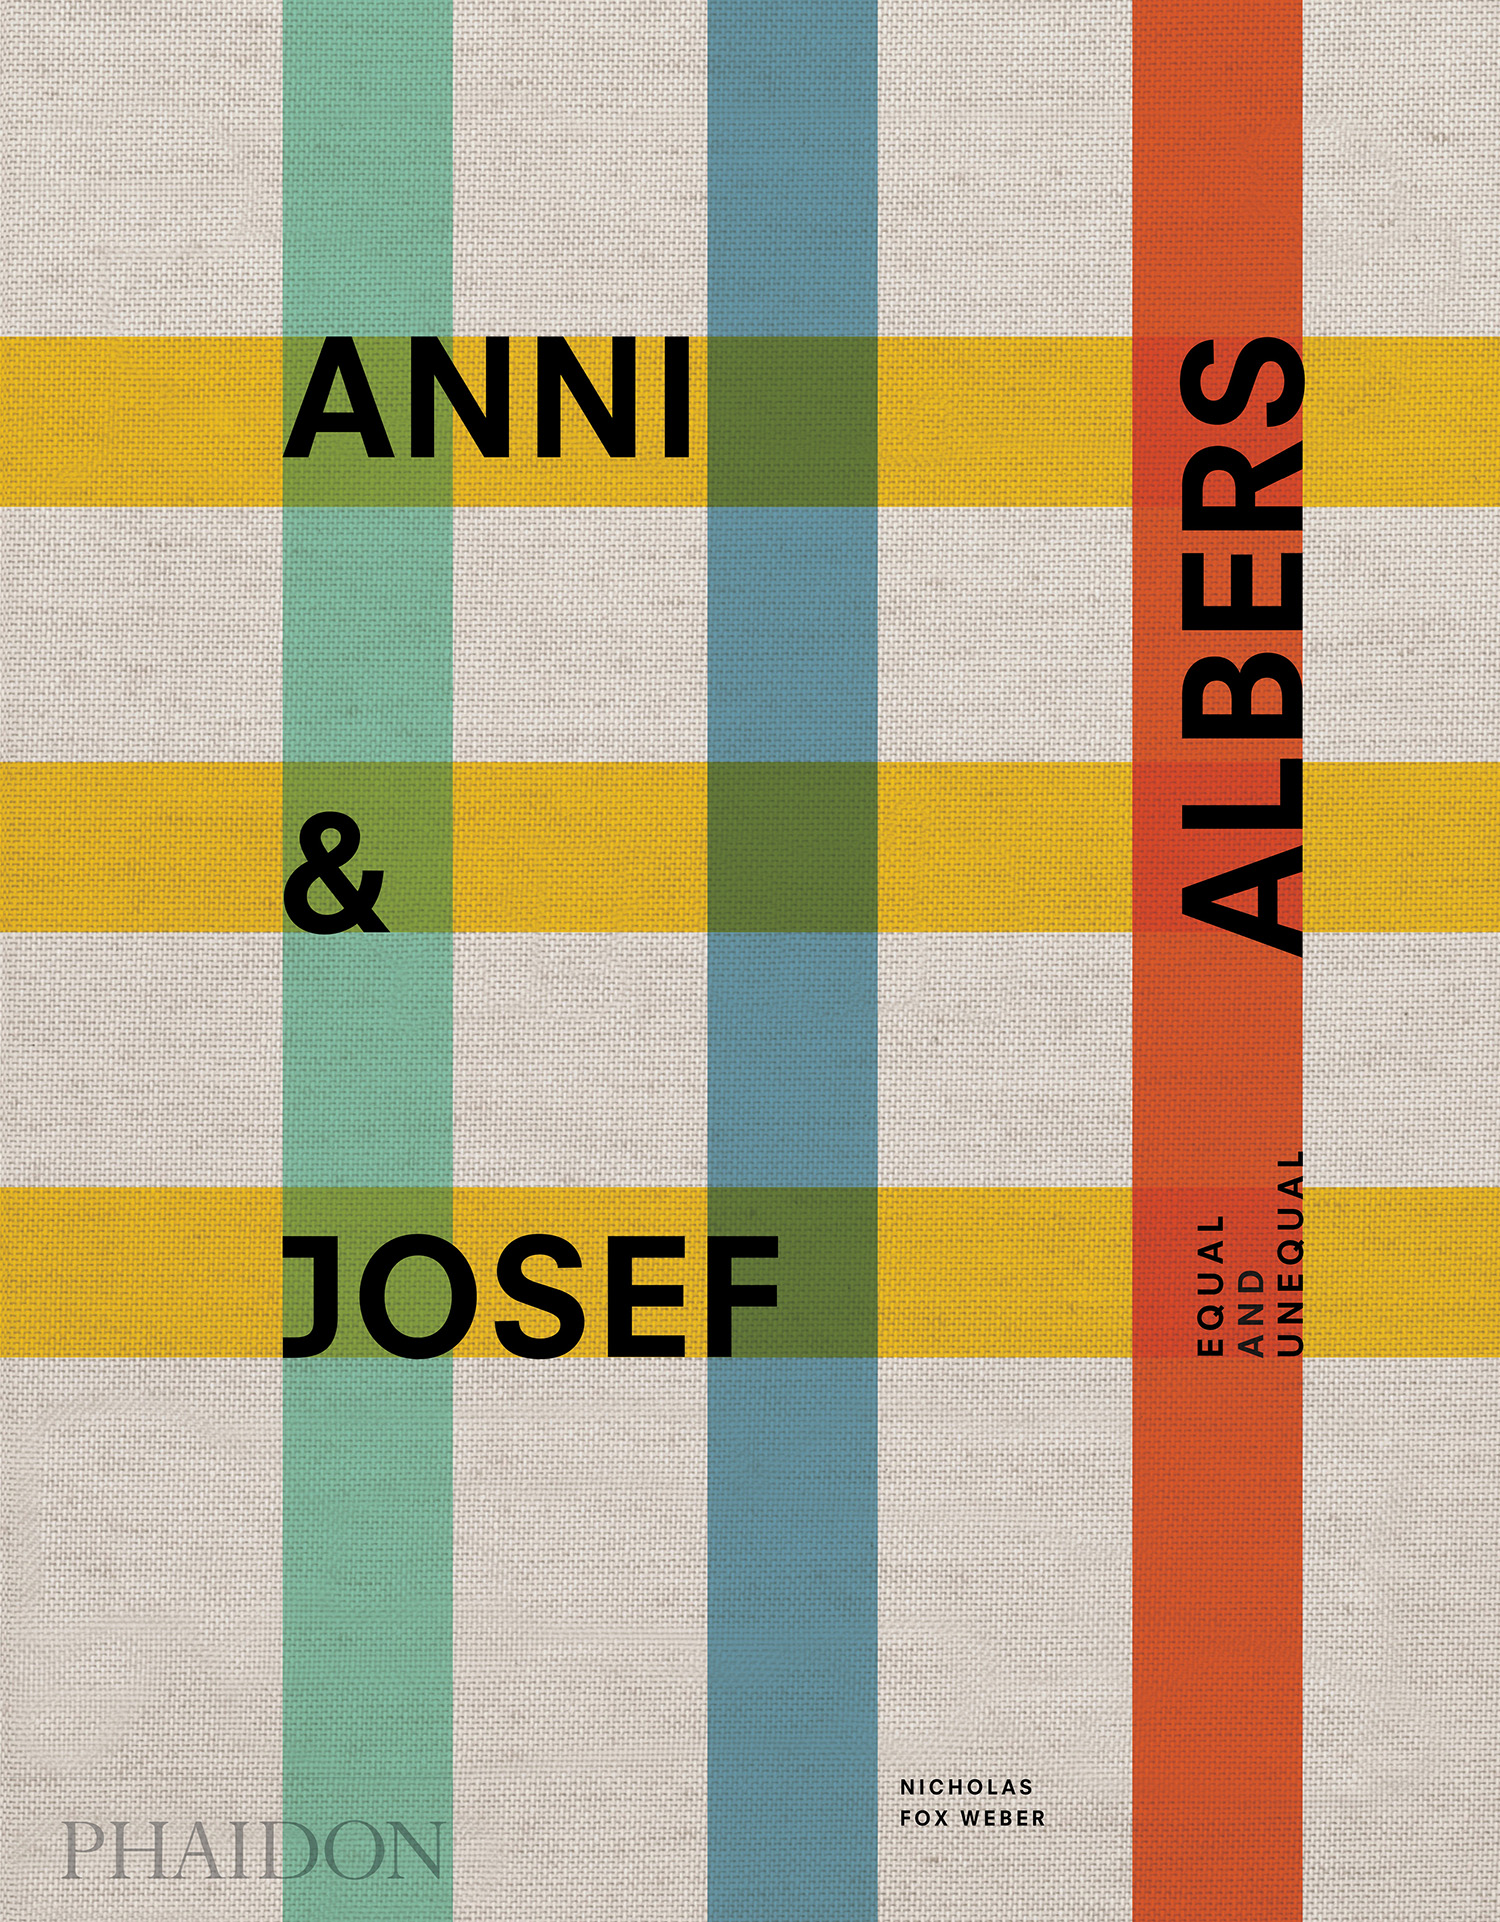 Anni & Josef Albers: Equal and Unequal by Nicholas Fox Weber, Phaidon